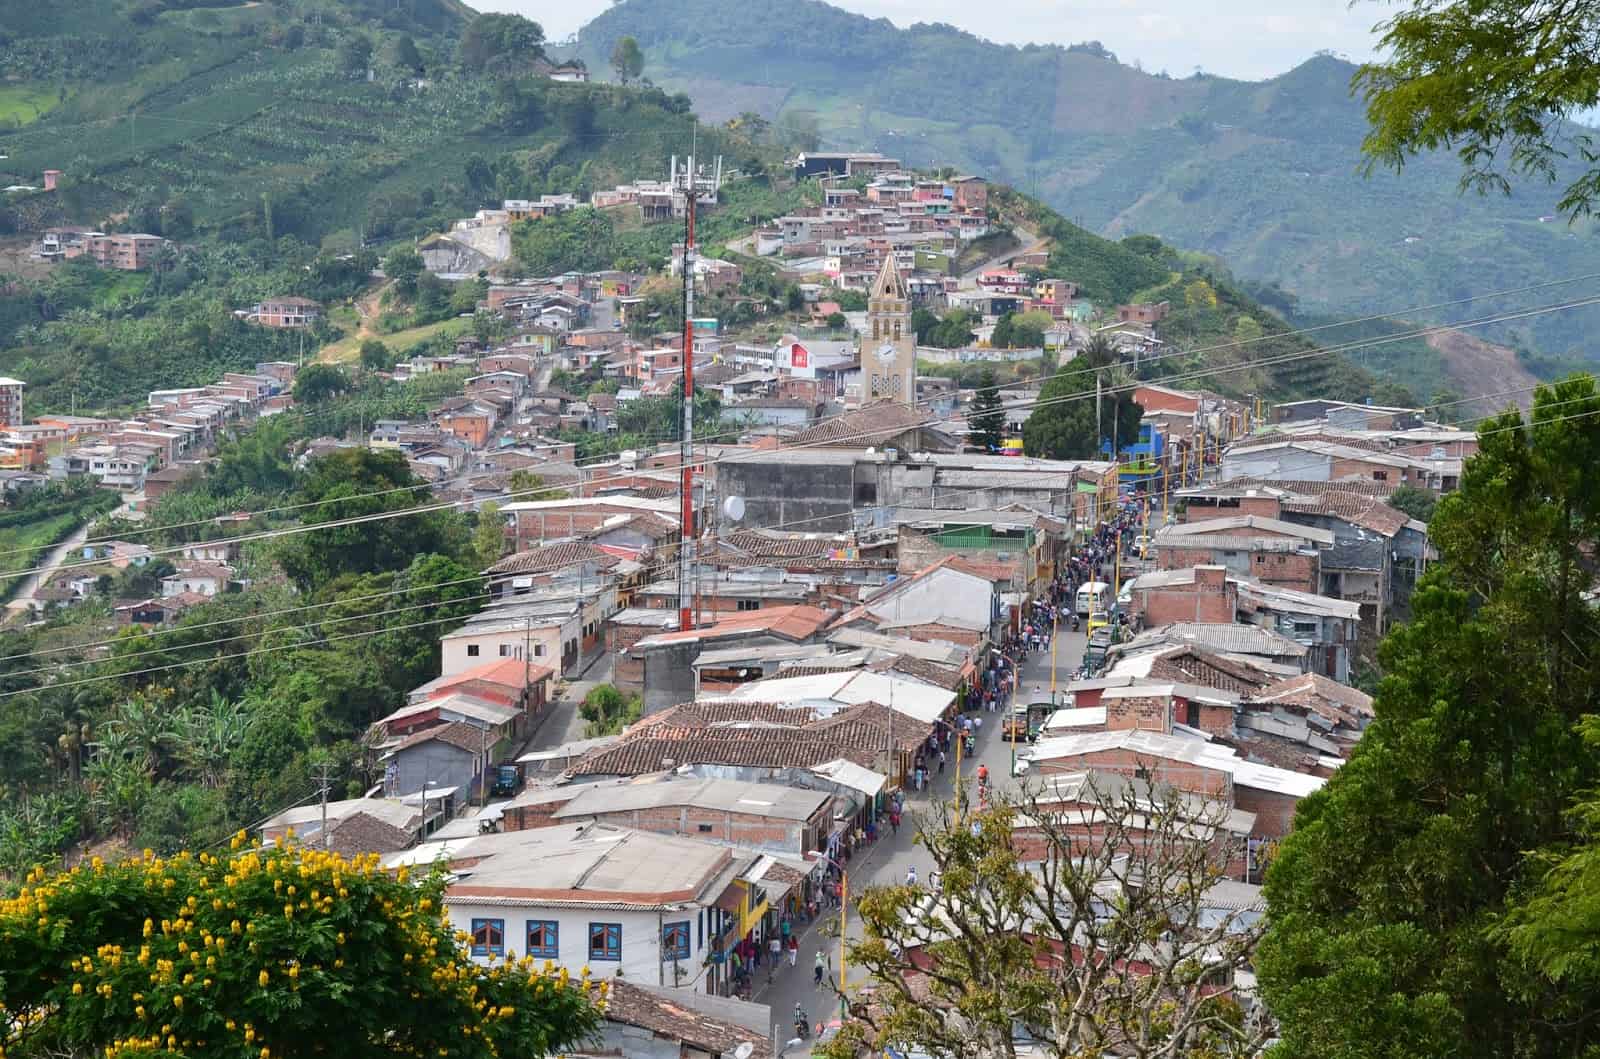 View of Risaralda, Caldas, Colombia, from the cemetery